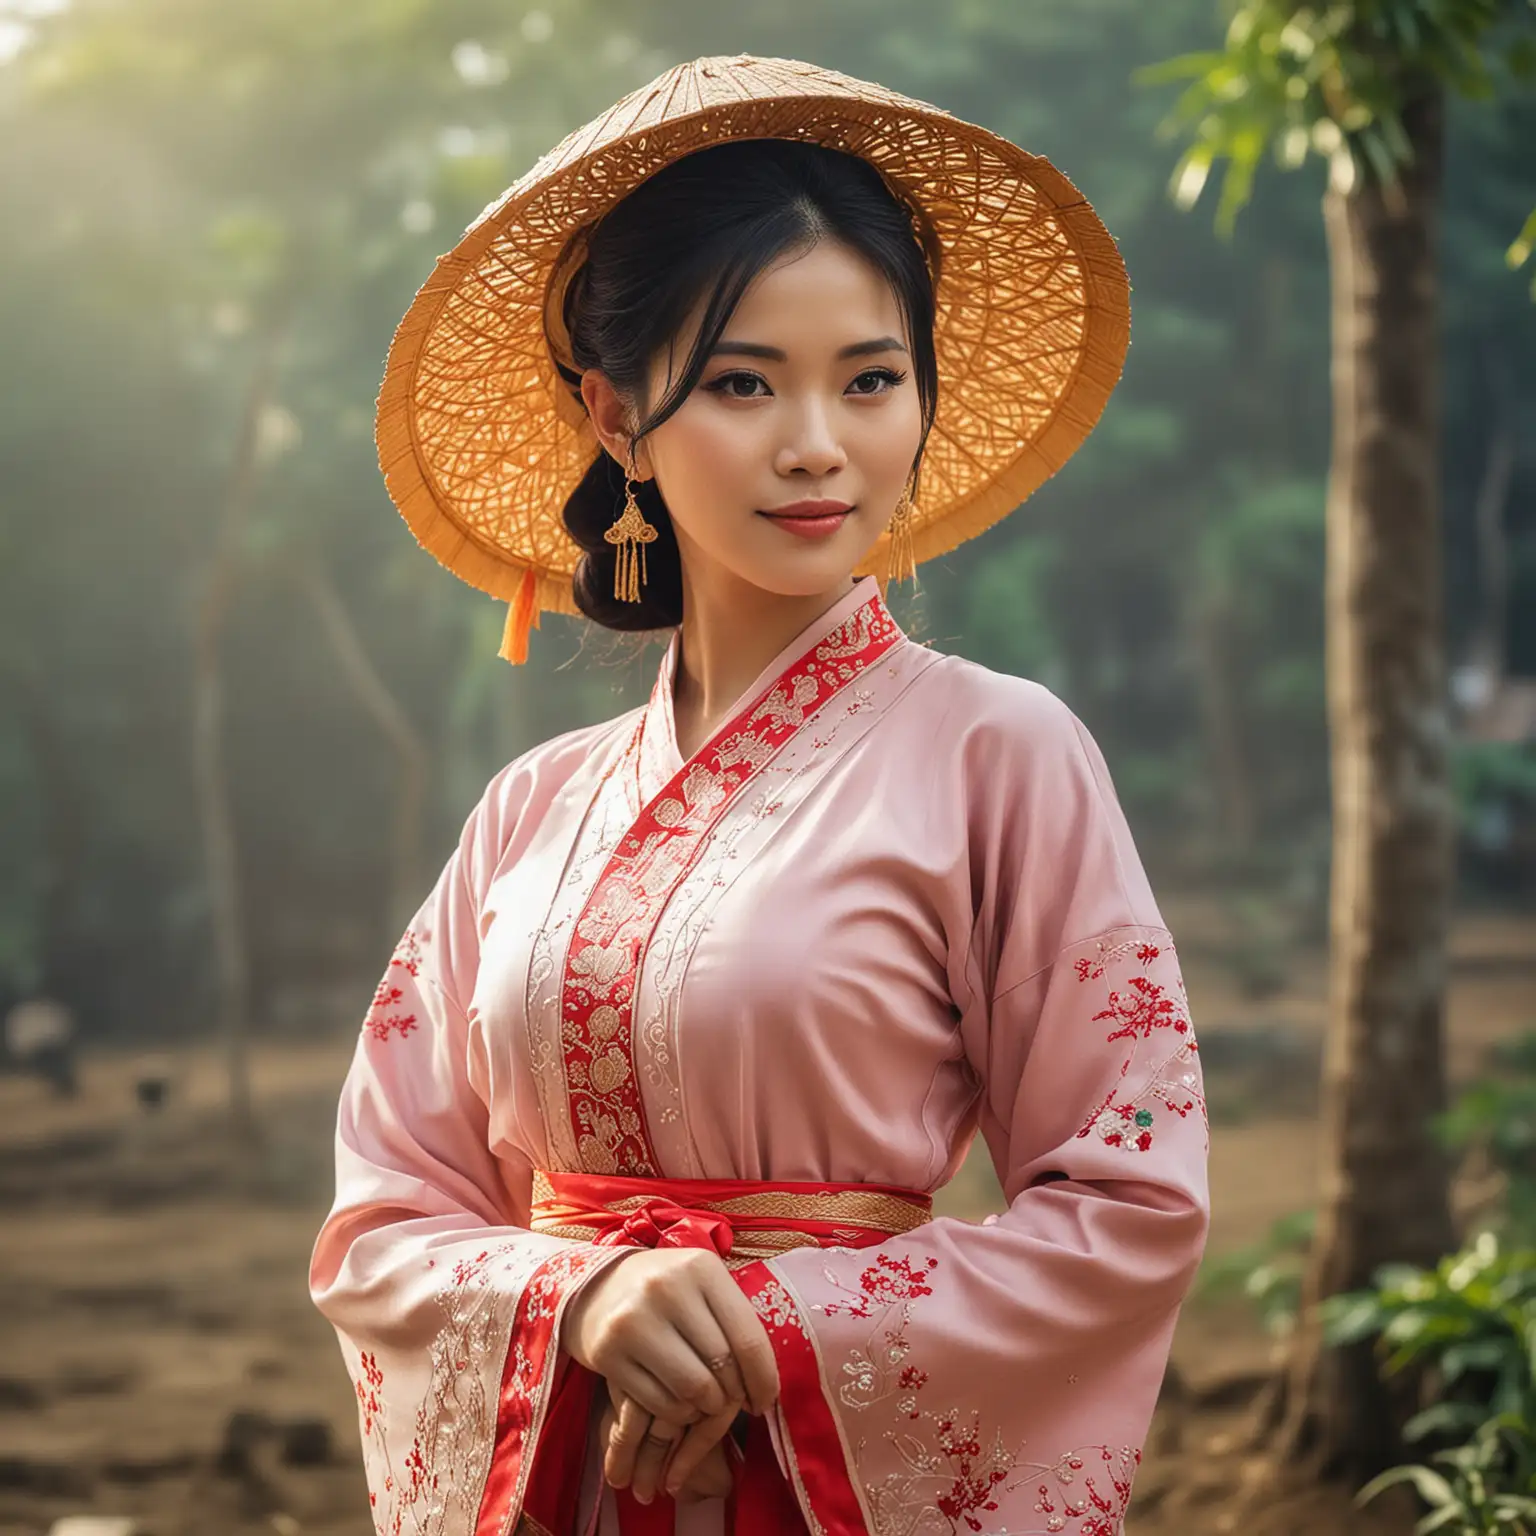 Vietnamese woman is traditional dress